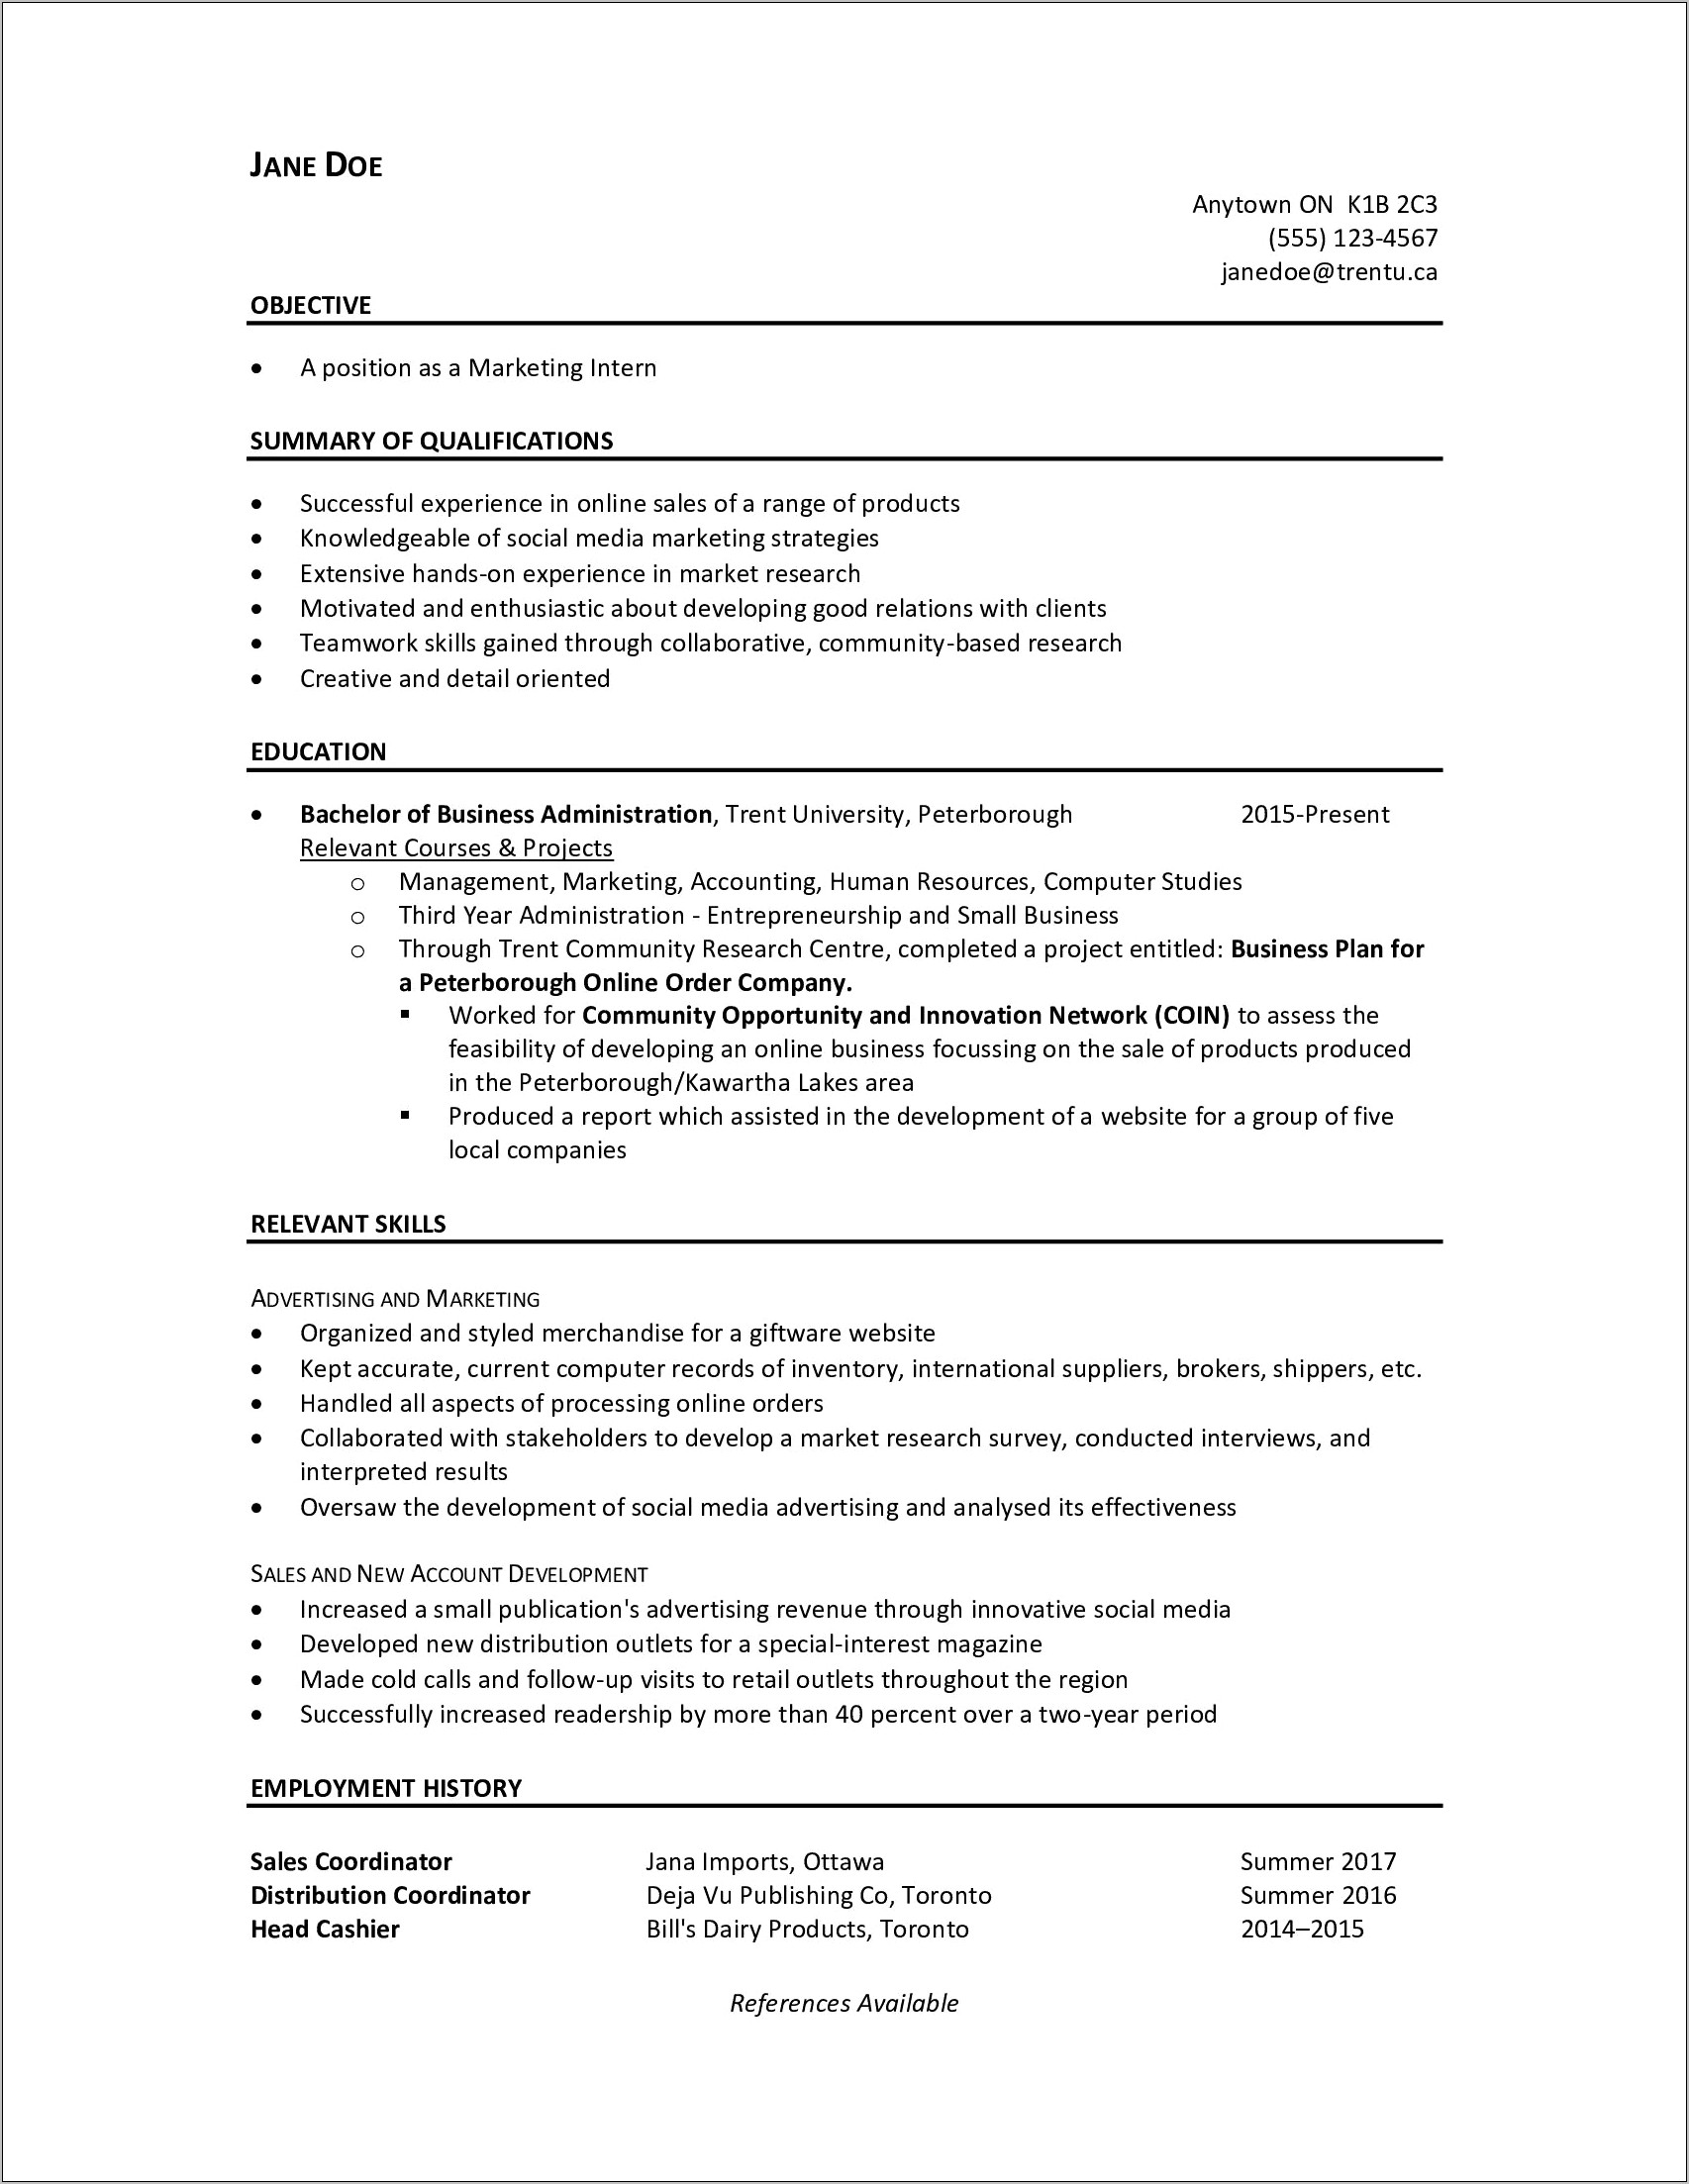 Resume With Skills In Work History